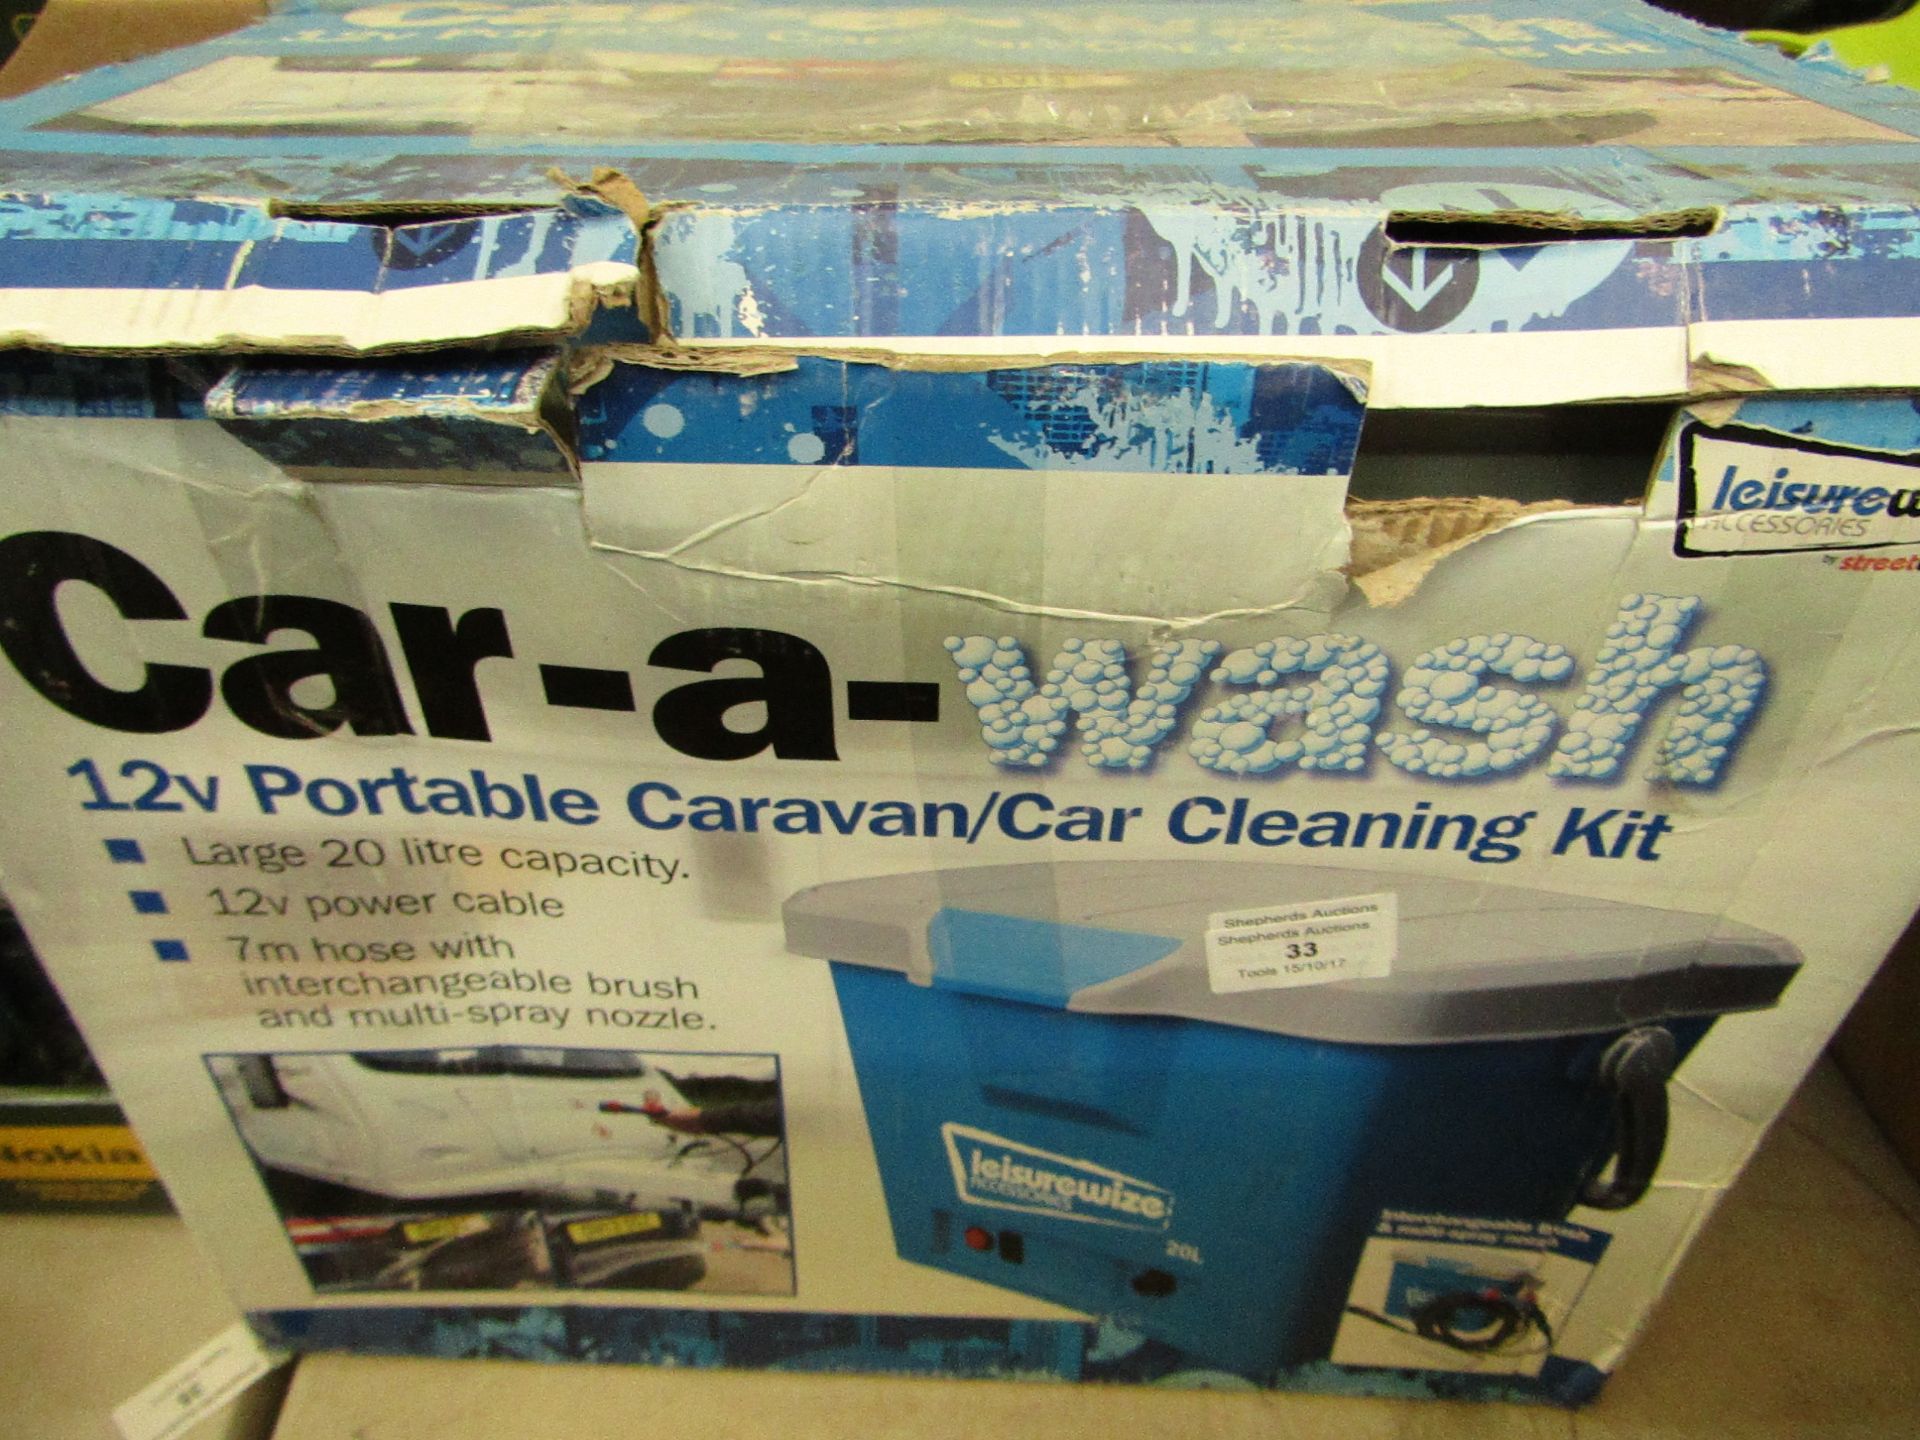 Cara-wash car and caravan cleaning kit, unchecked and boxed.